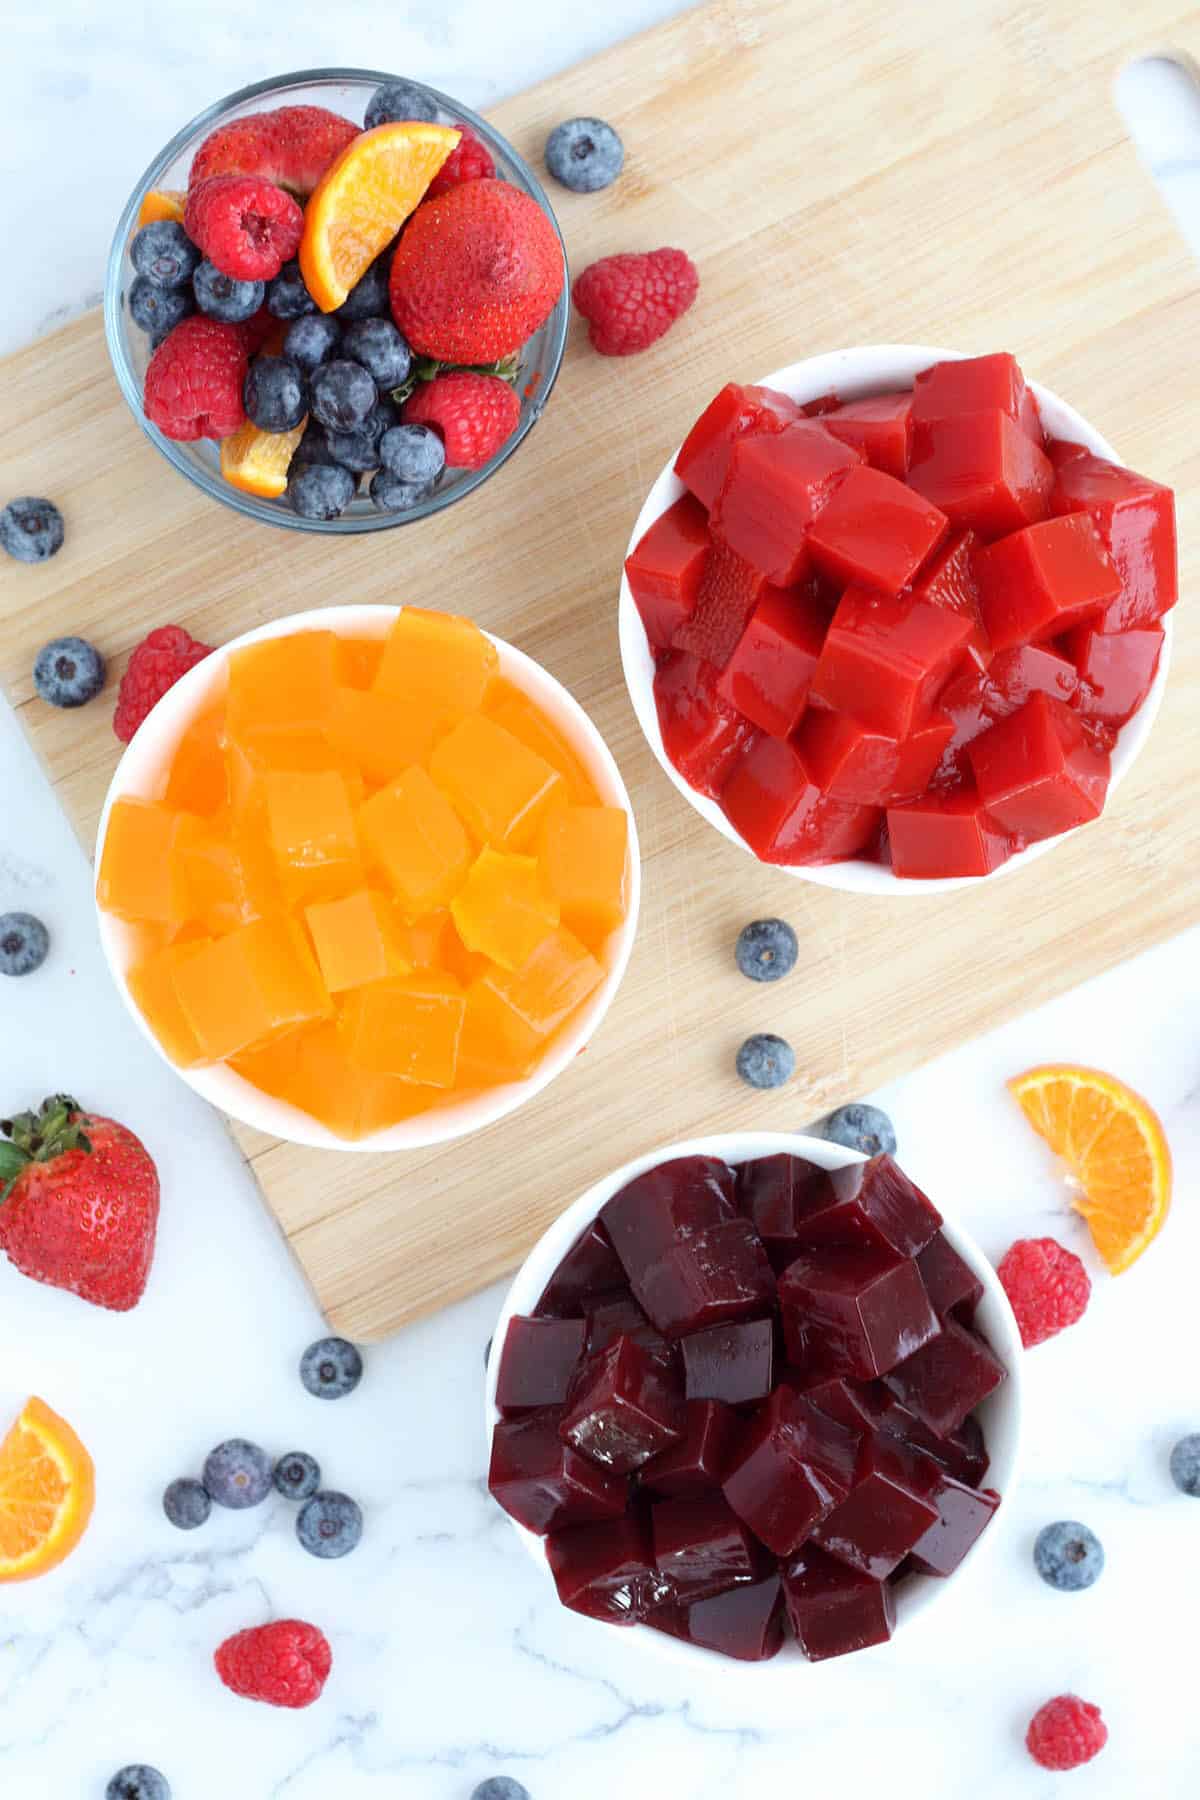 Bowl of homemade jelly on wooden board with fresh fruits